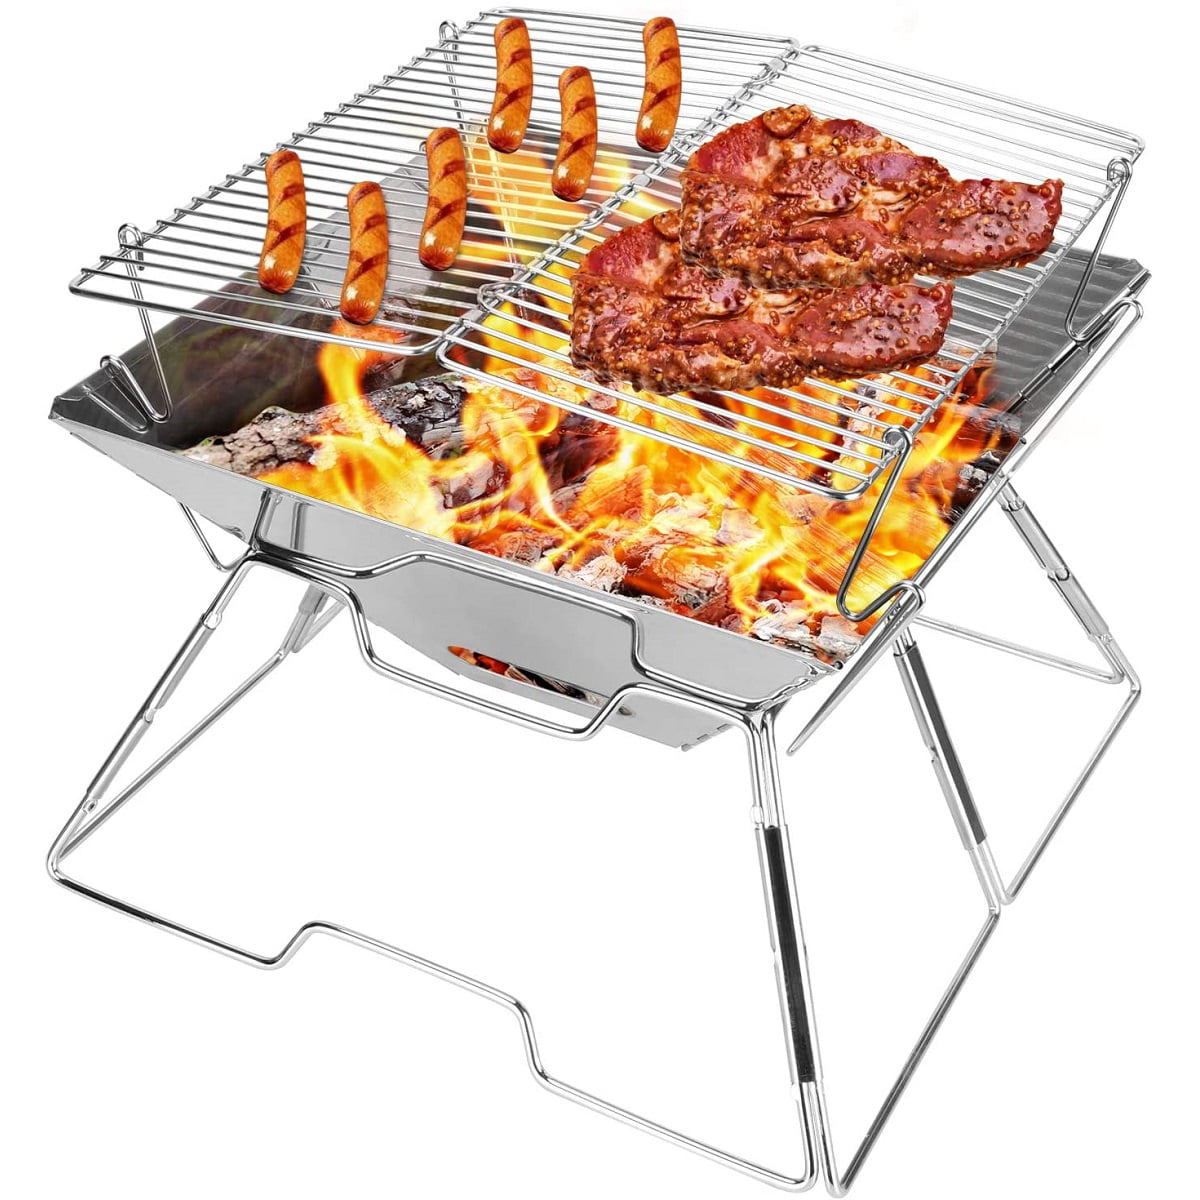 Silver Large Mesh REDCAMP Folding Campfire Grill 304 Stainless Steel Grate Heavy Duty Portable Camping Grill with Legs Carrying Bag